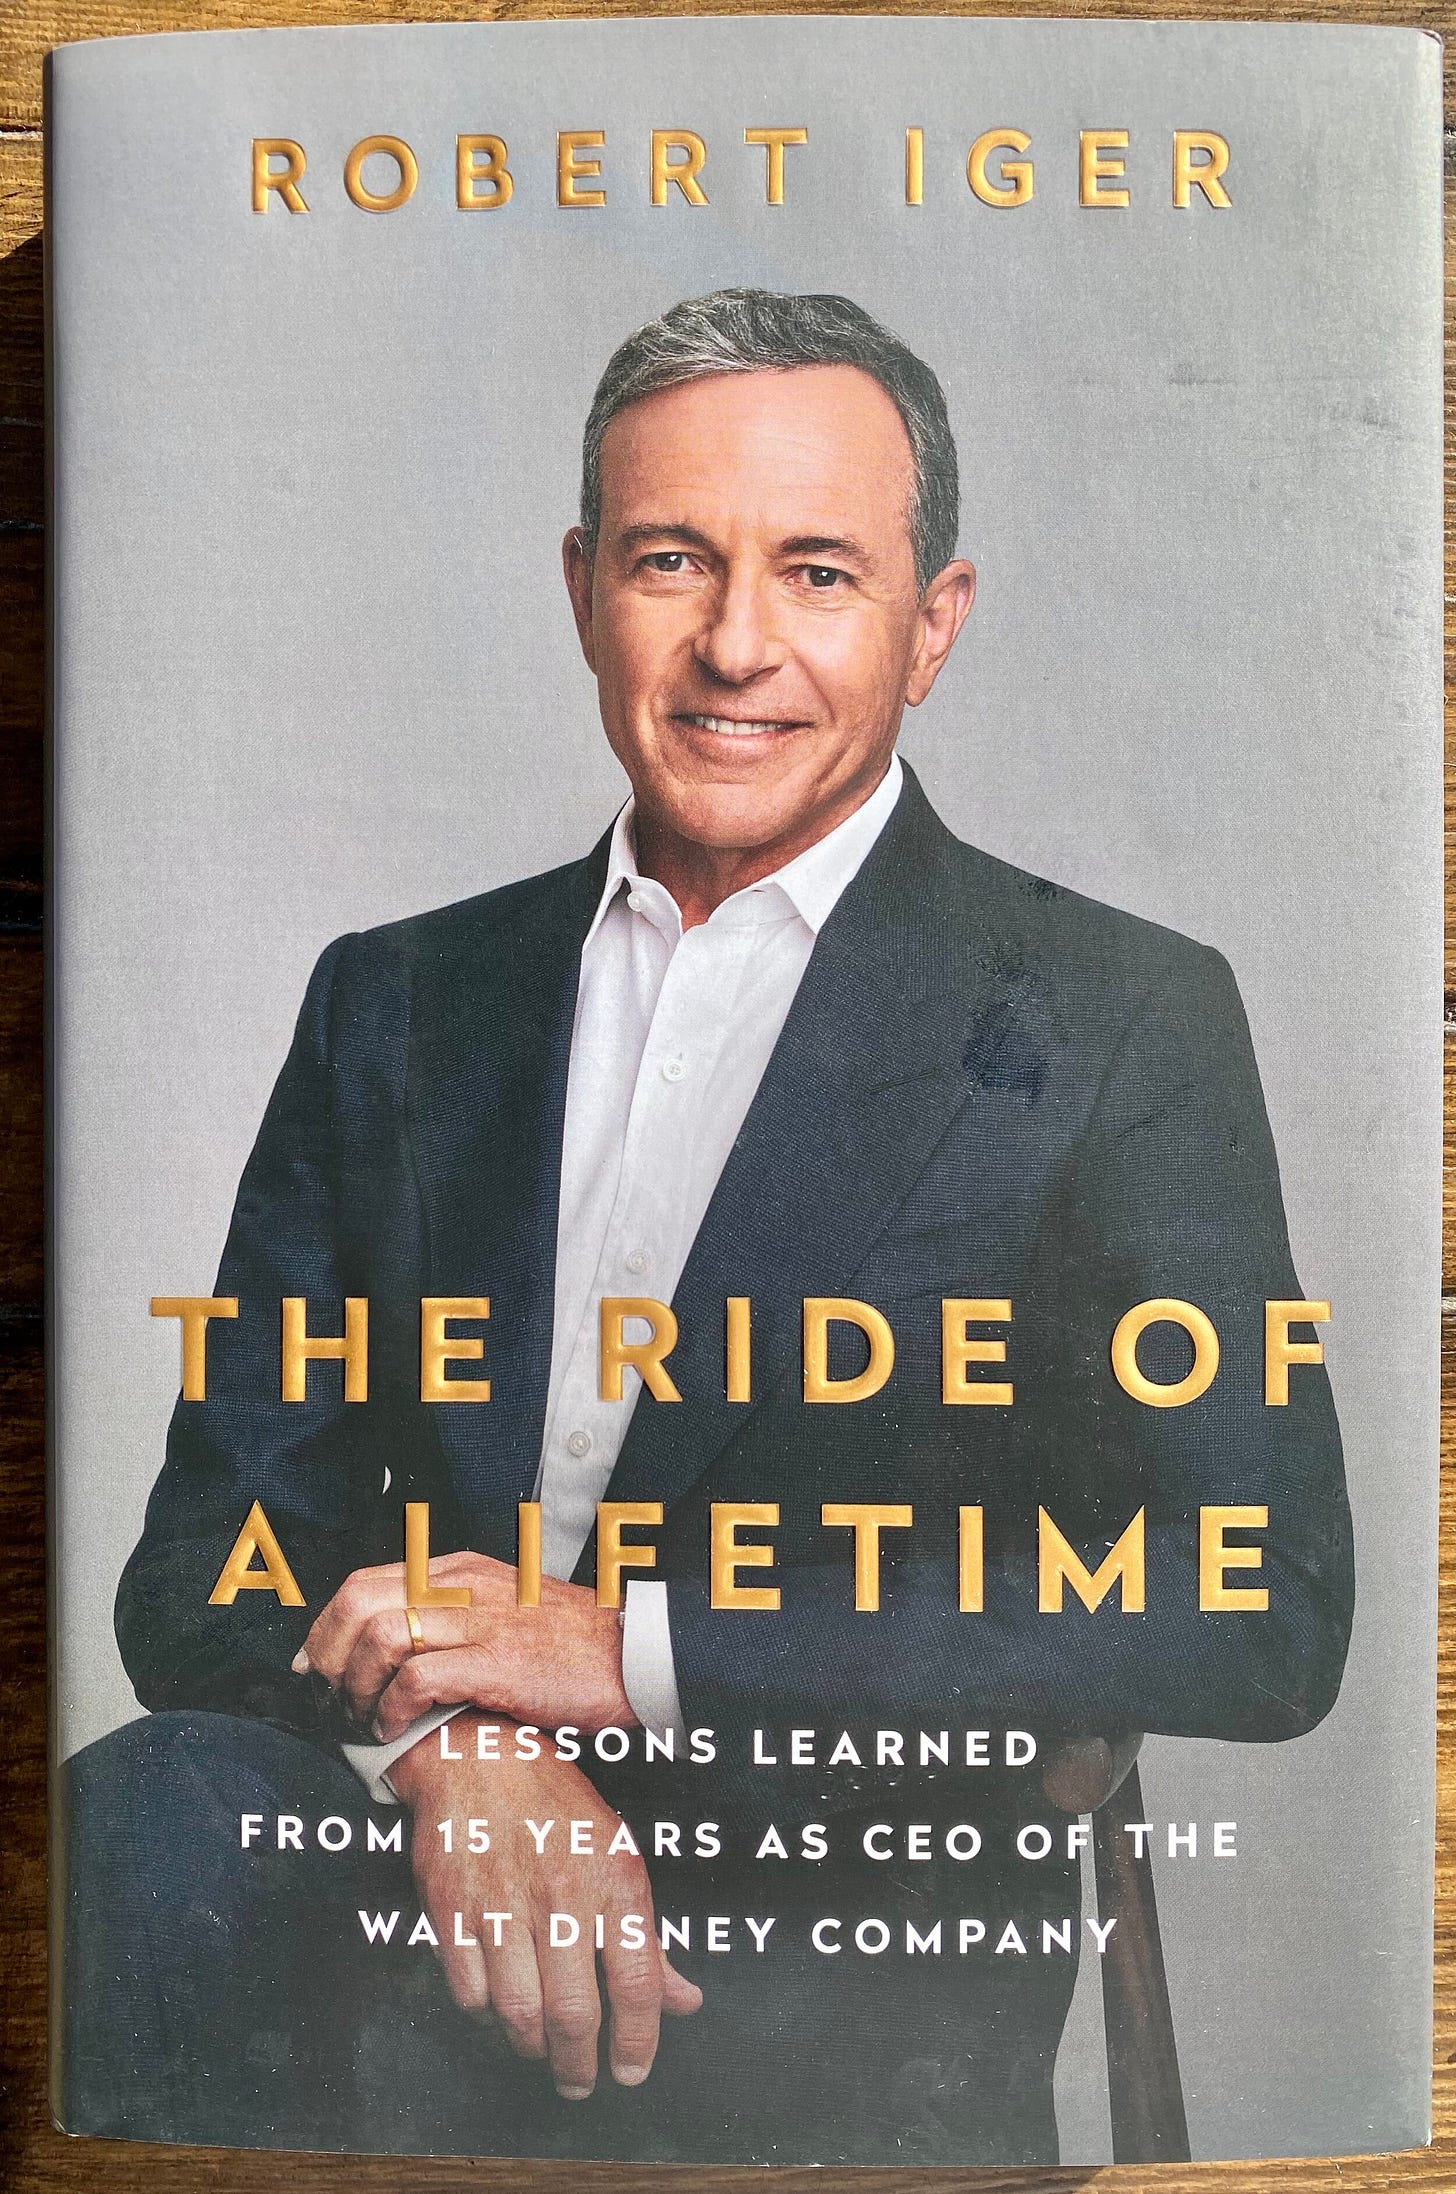 The Ride of a Lifetime, by Robert Iger